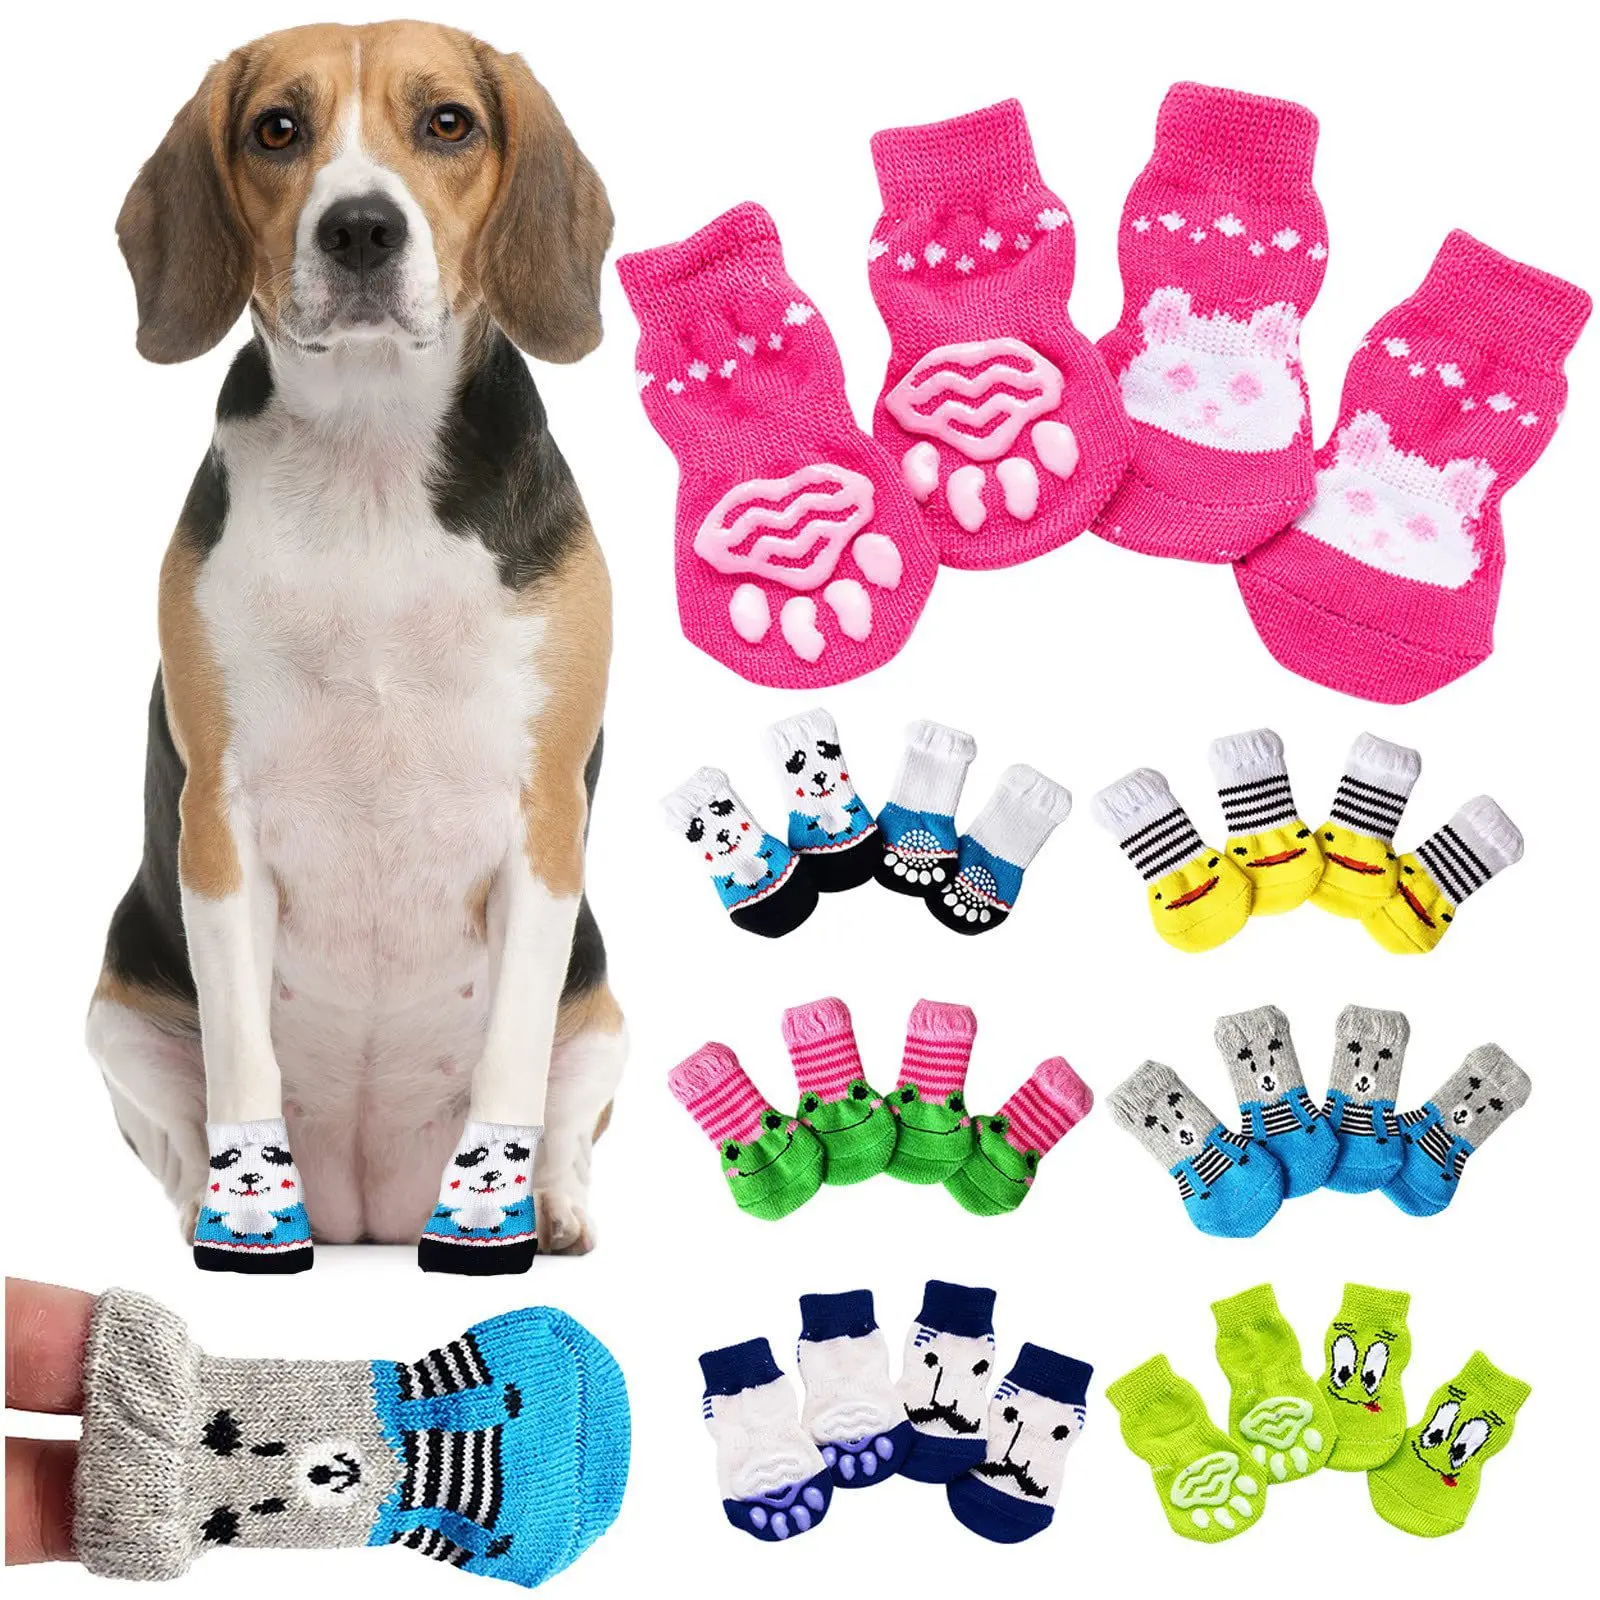 

For 4pcs Socks Dog Cats Shoes Anti-slip Chihuahua Paw Spitz With Cute Protector Print Small Dogs Products York Puppy Pet Breeds